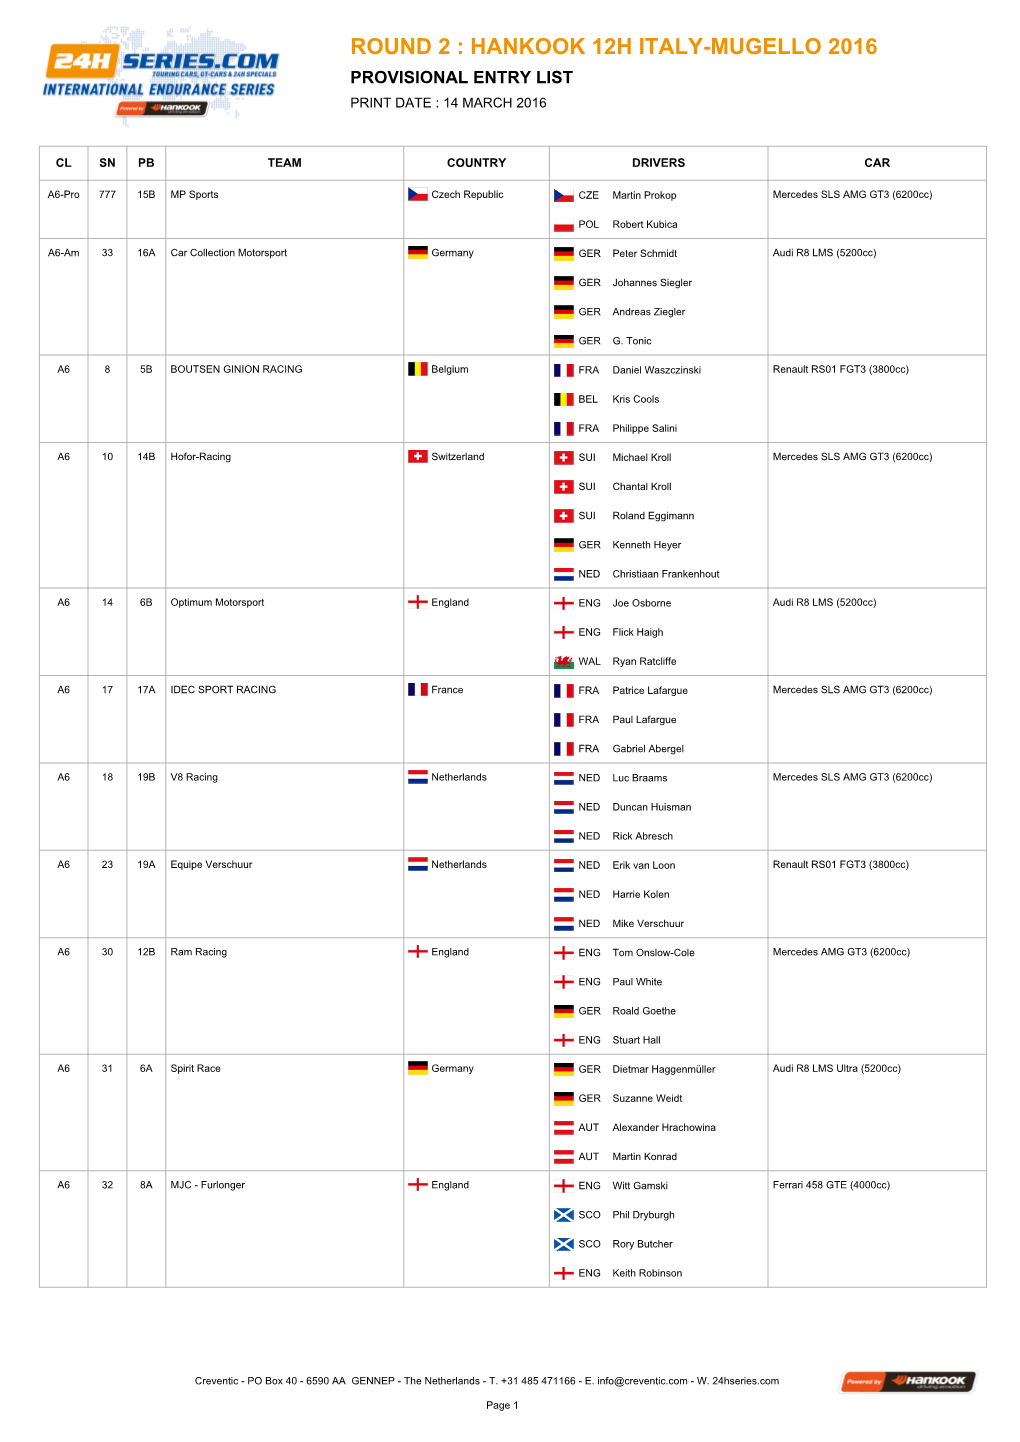 Hankook 12H Italy-Mugello 2016 Provisional Entry List Print Date : 14 March 2016